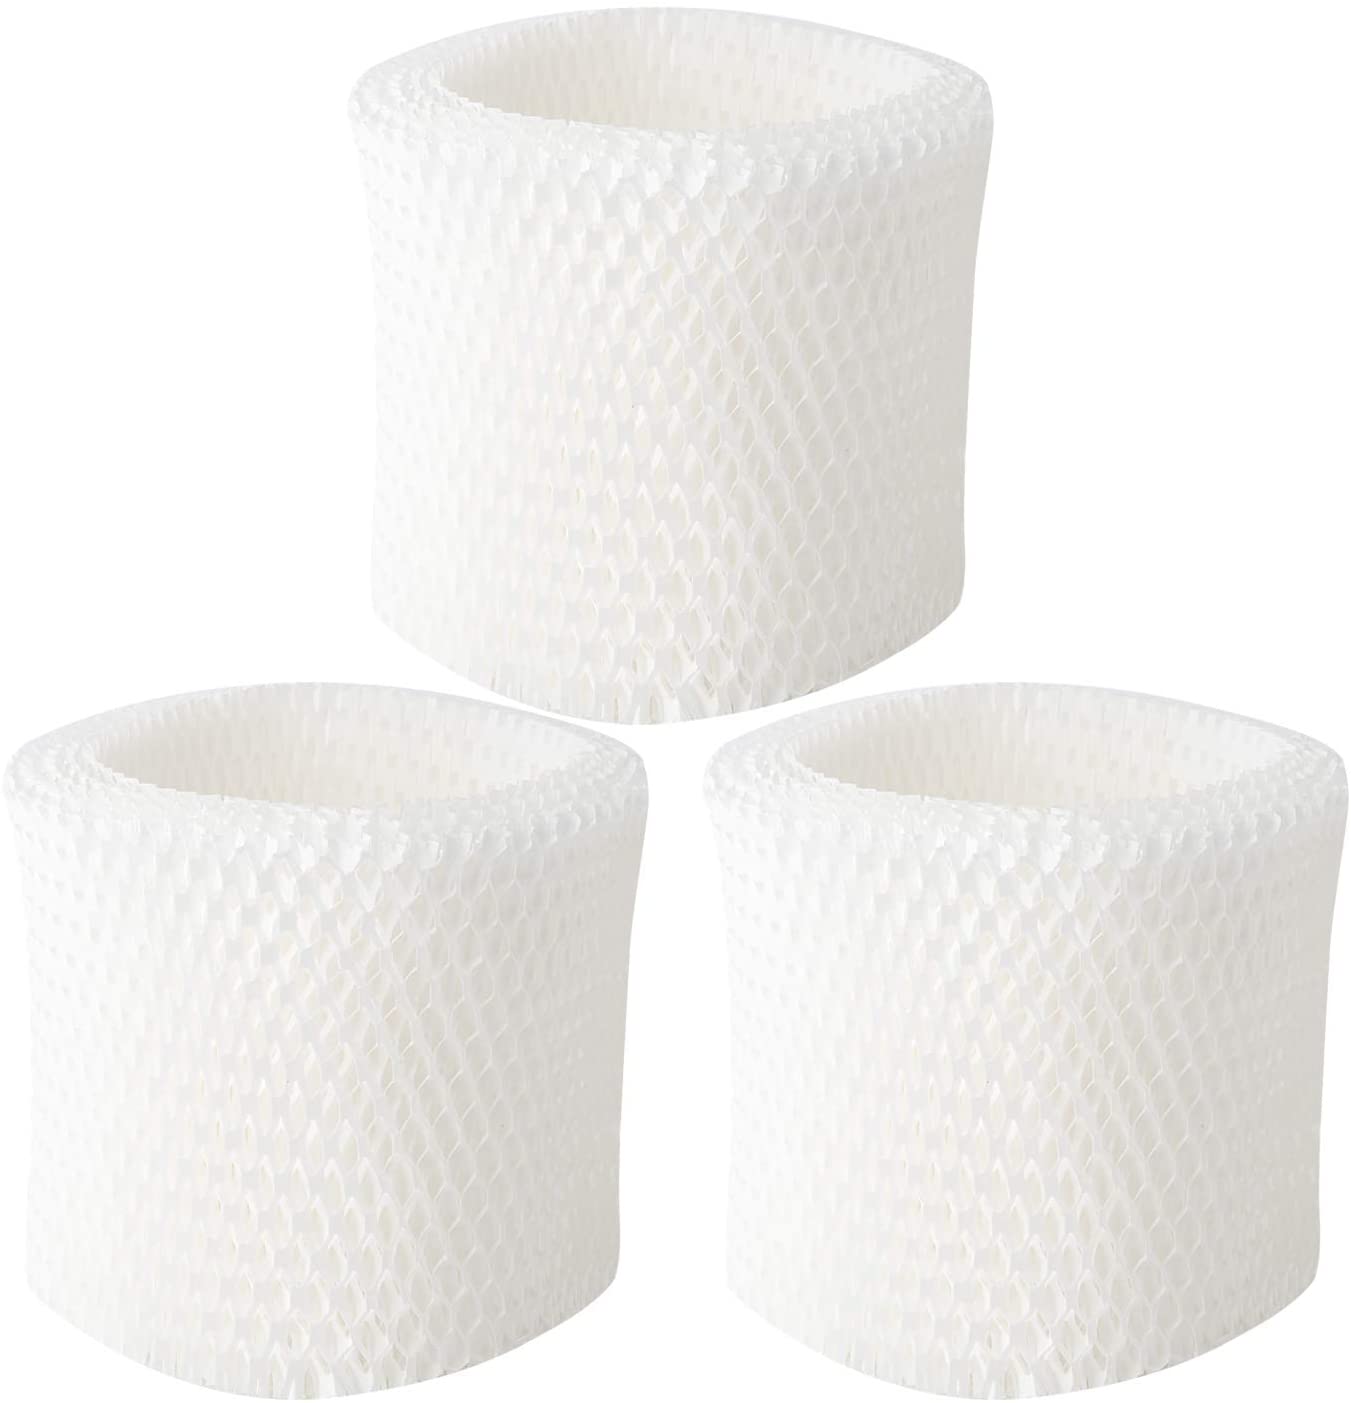 Colorfullife Honeywell Compatible Replacement Humidifier Filters, 3-Pack